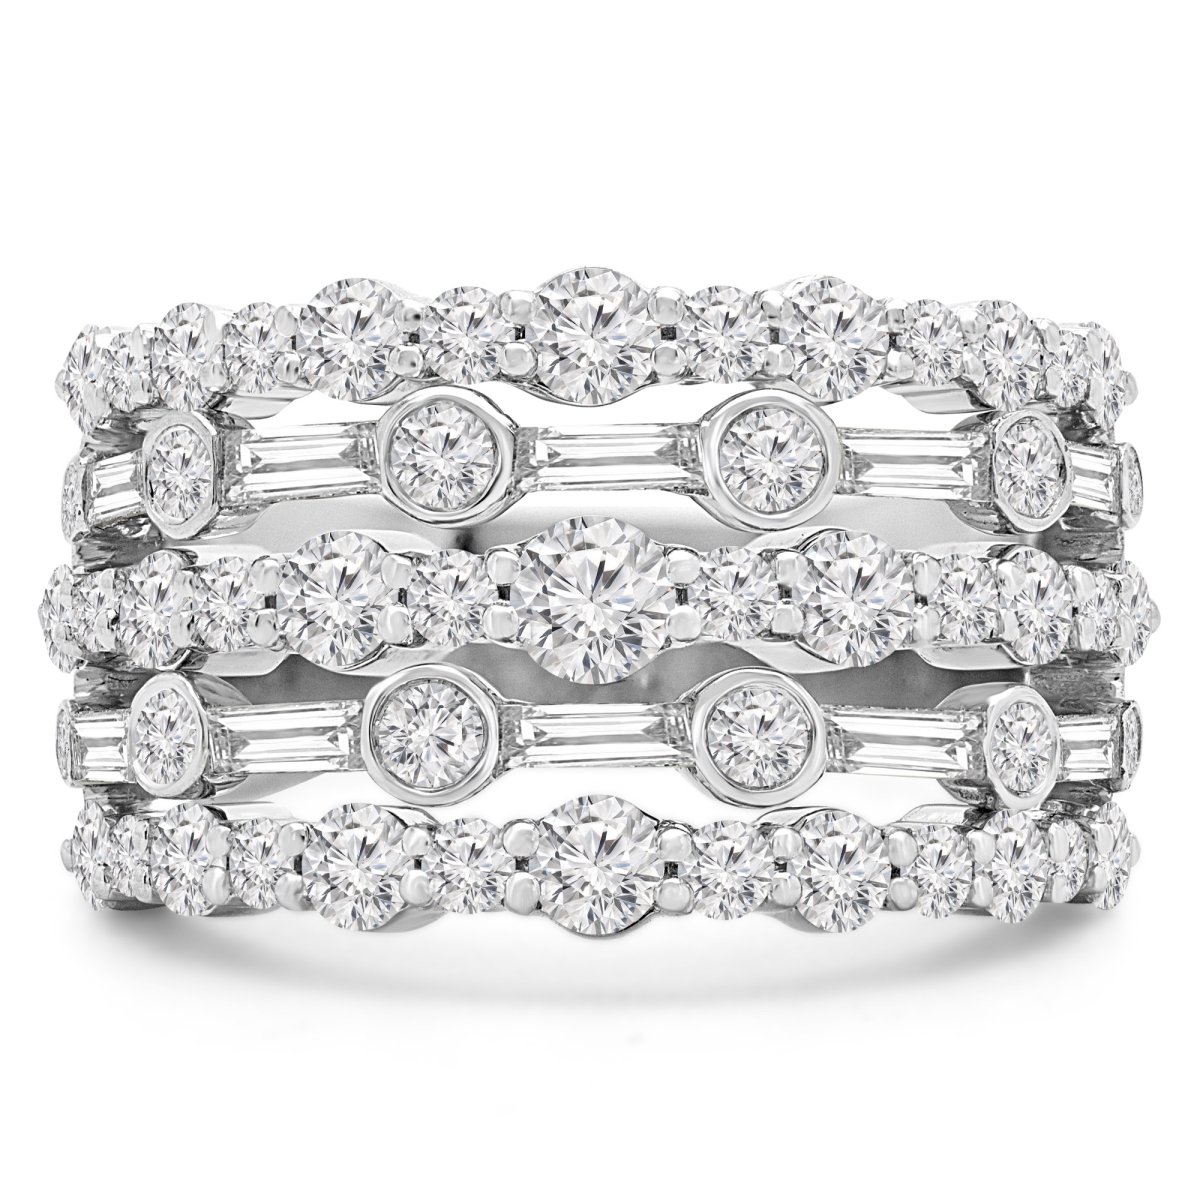 2.125 Ctw Round Diamond Vintage Five-row Cocktail Ring In 18k White Gold - Size 3.25